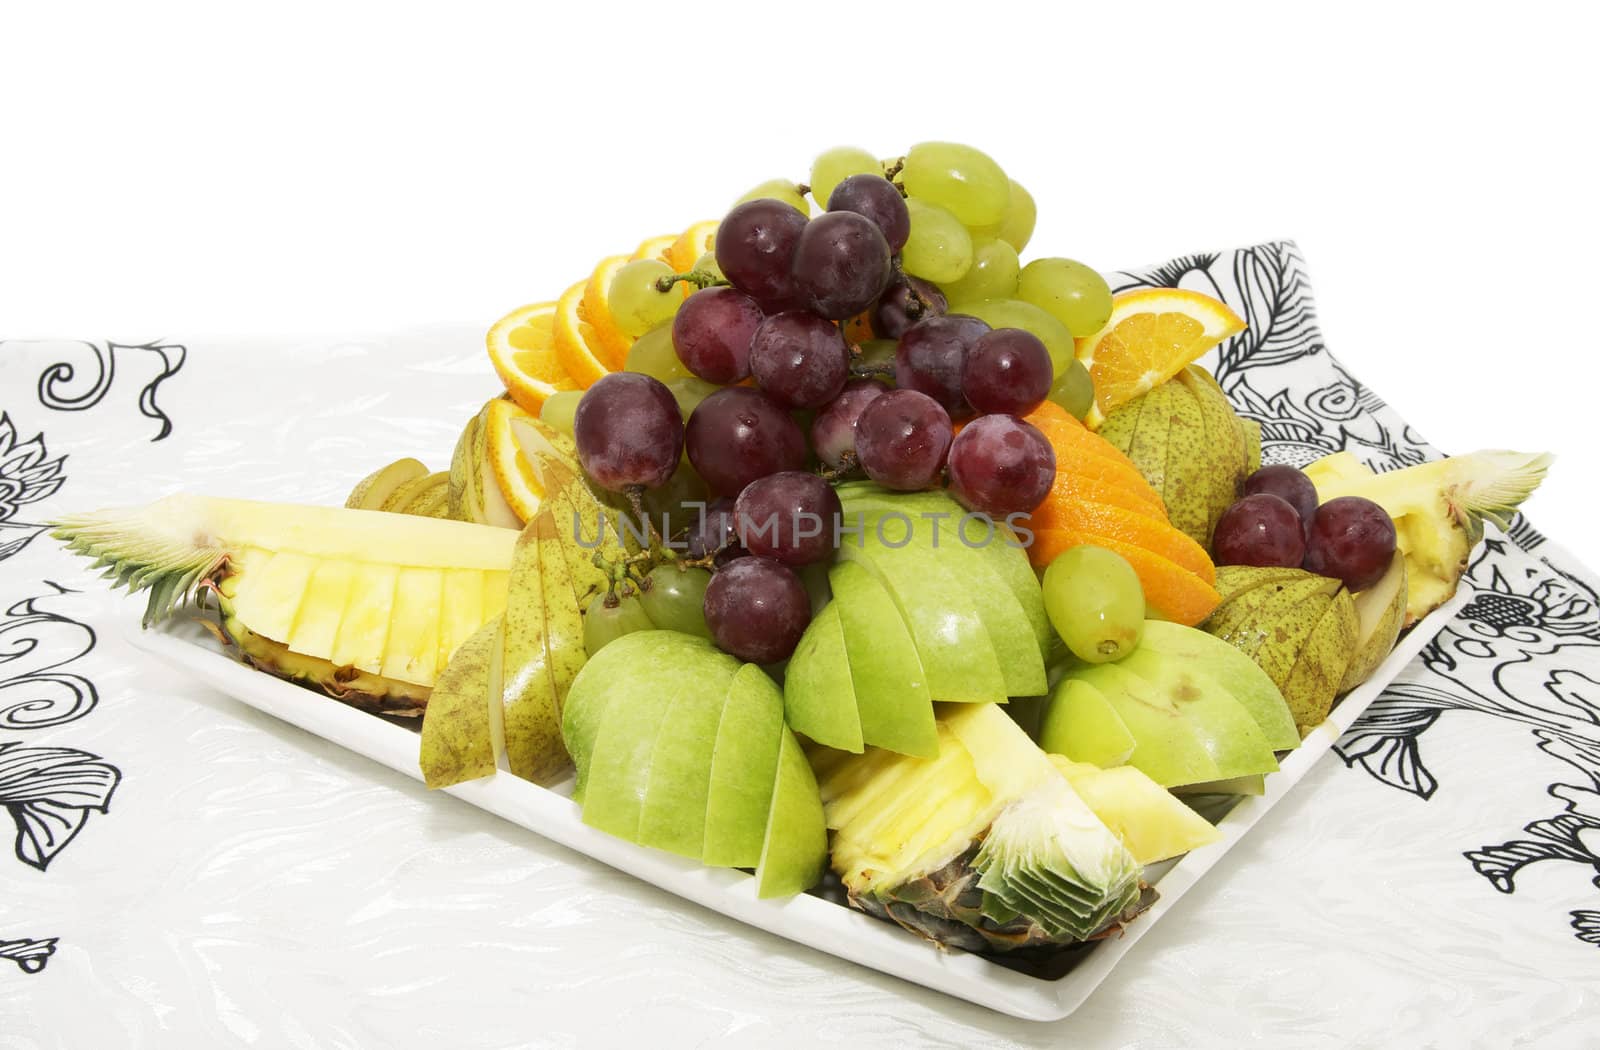 plate with fruits and berries by Lester120